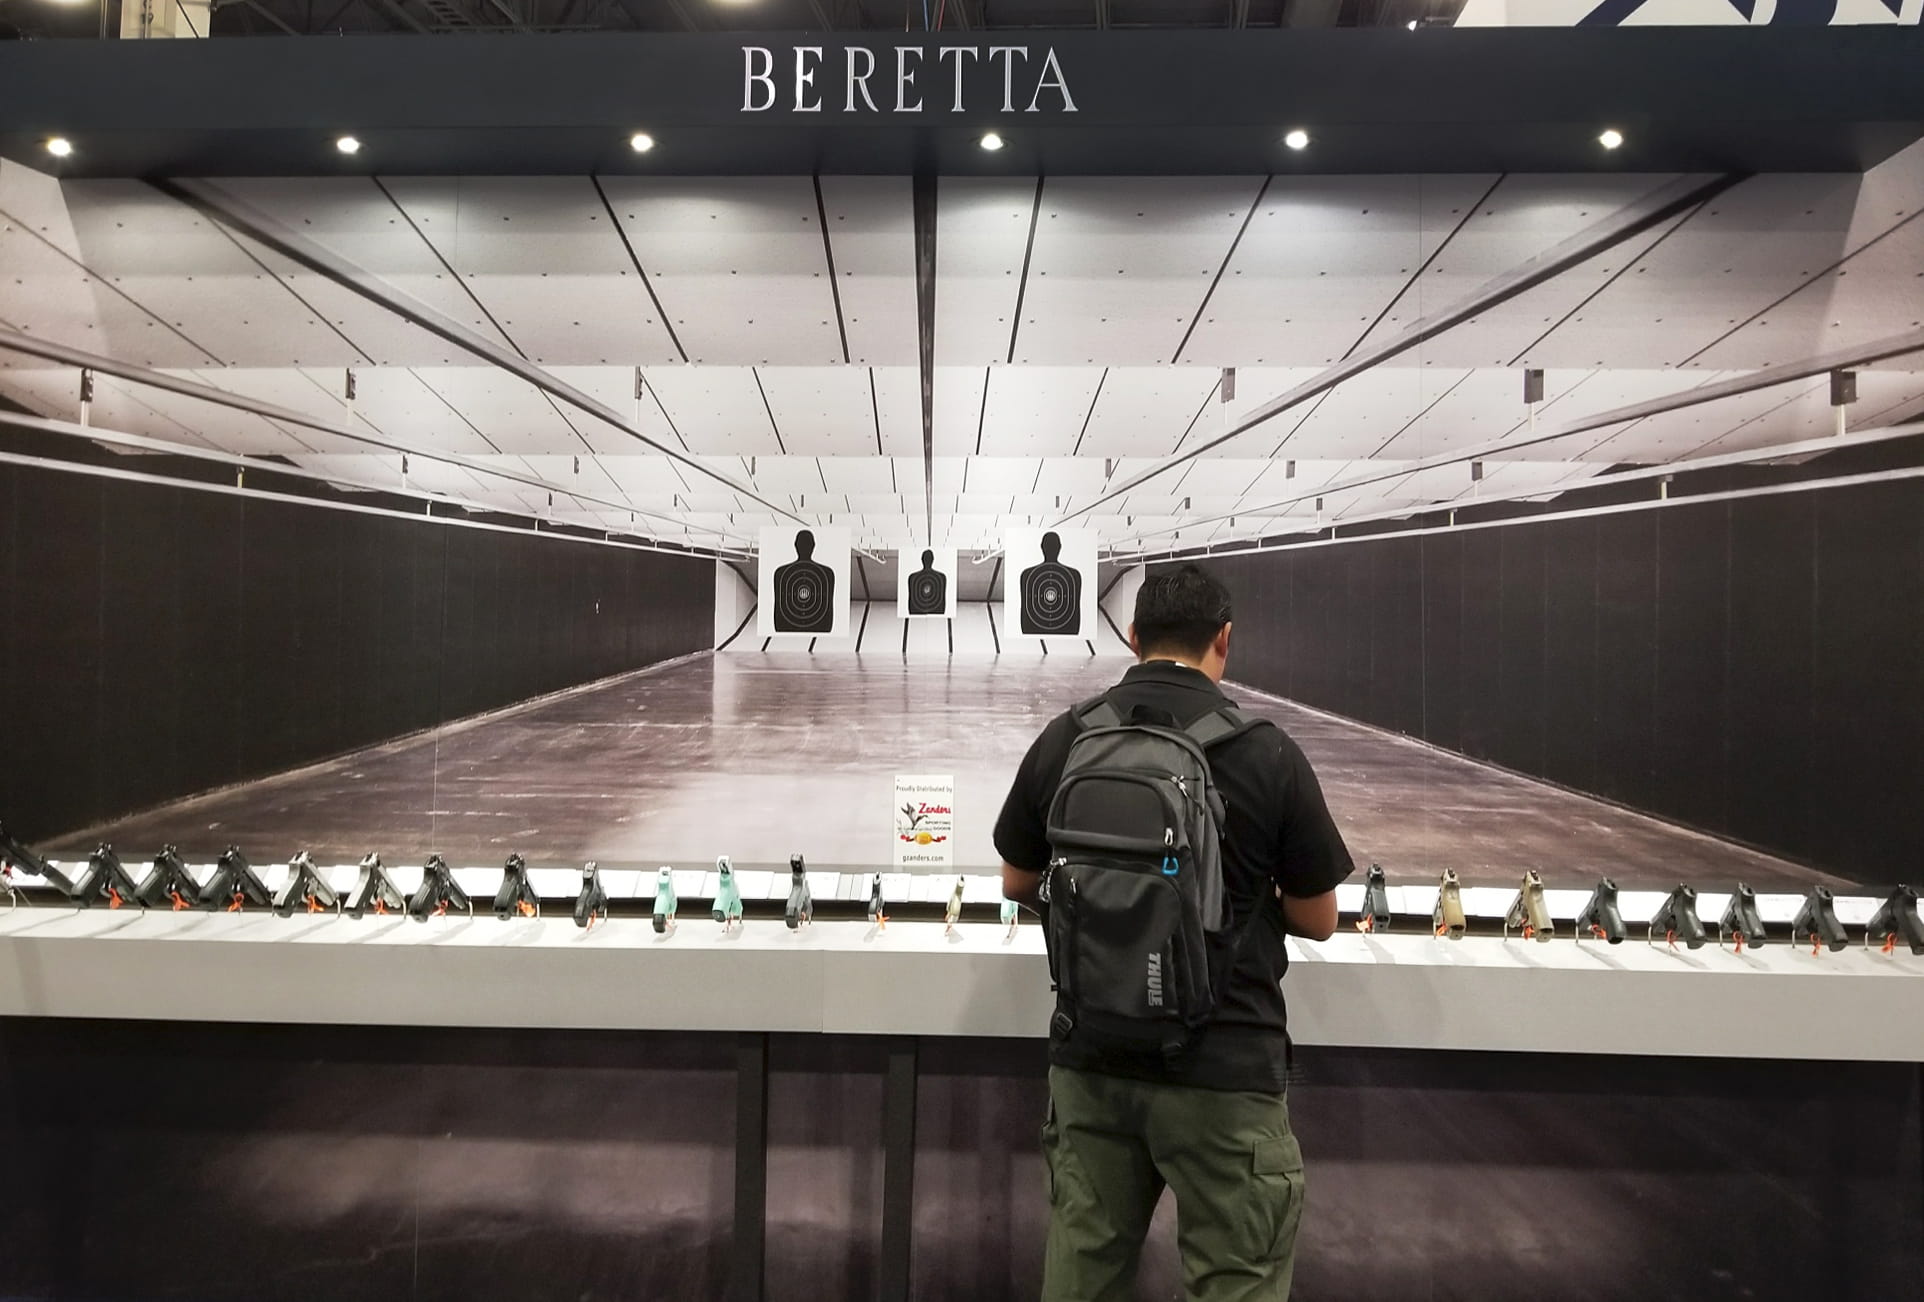 The Beretta booth at the SHOT Show.